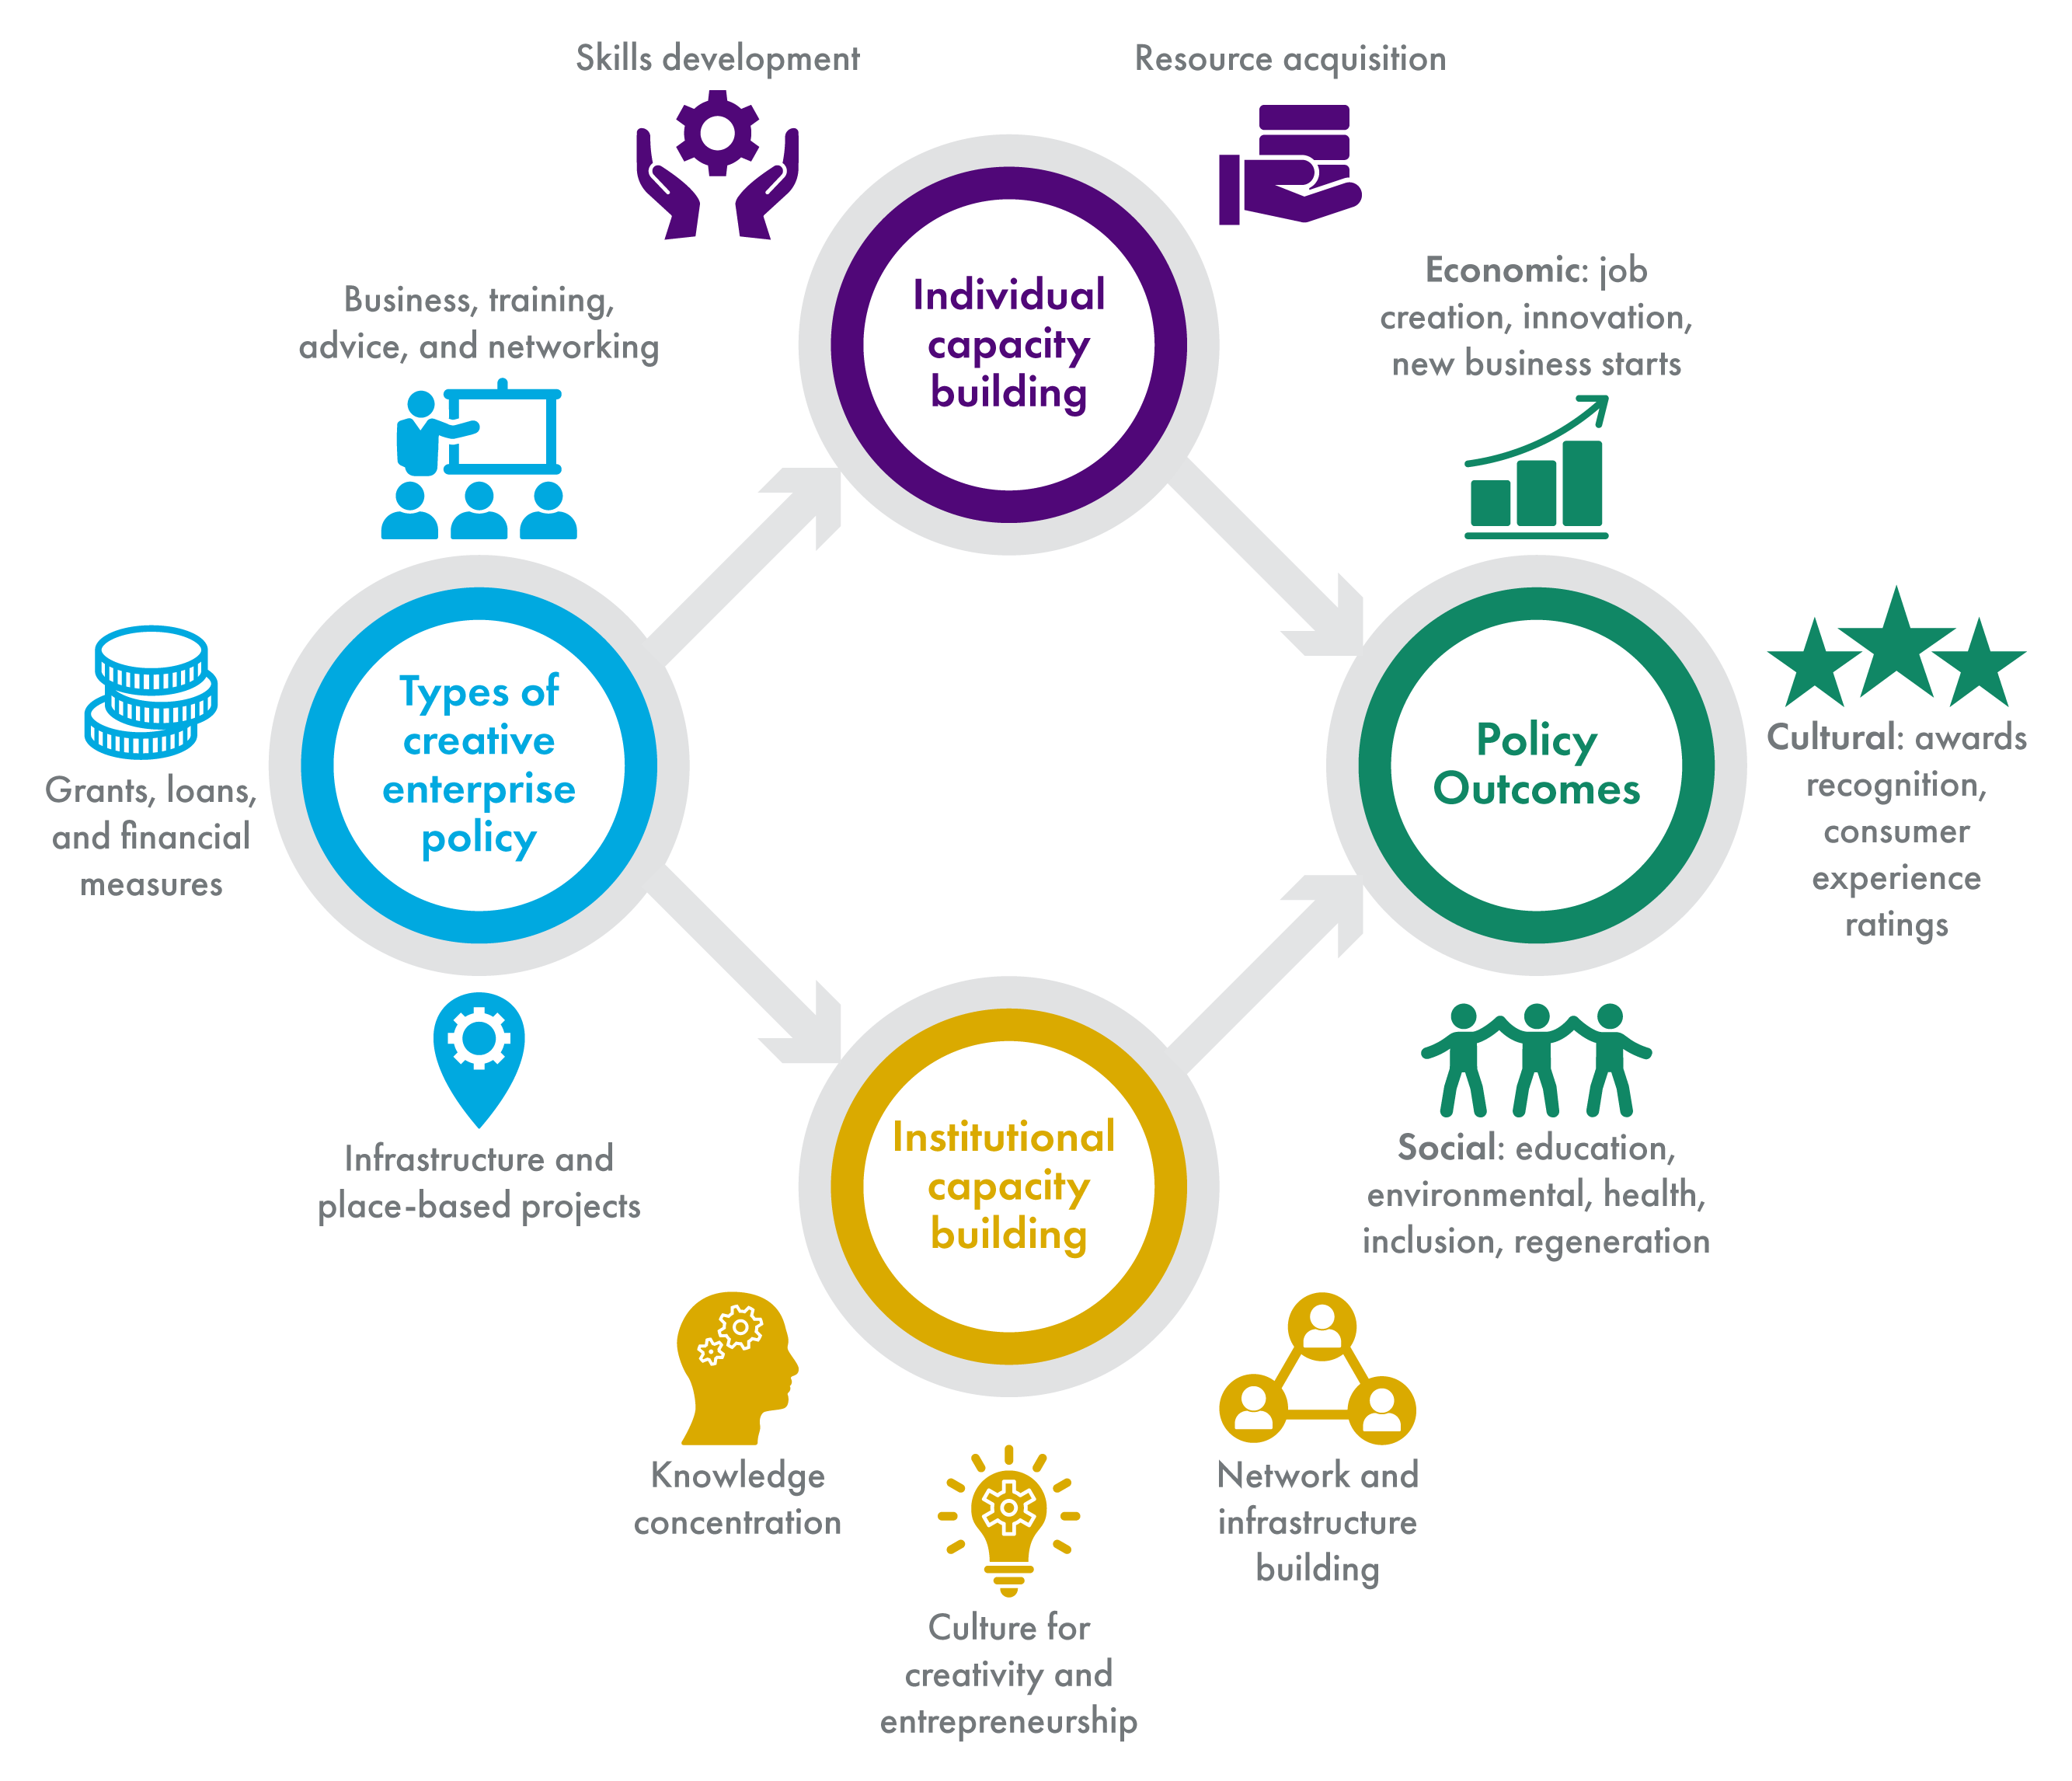 This infographic sets out a theoretical approach to assessing policy to support creative enterprises; policy aims to deliver economic growth through either increasing the individual capacity of creative practitioners, or improving the institutional capacity to support the wider sector.